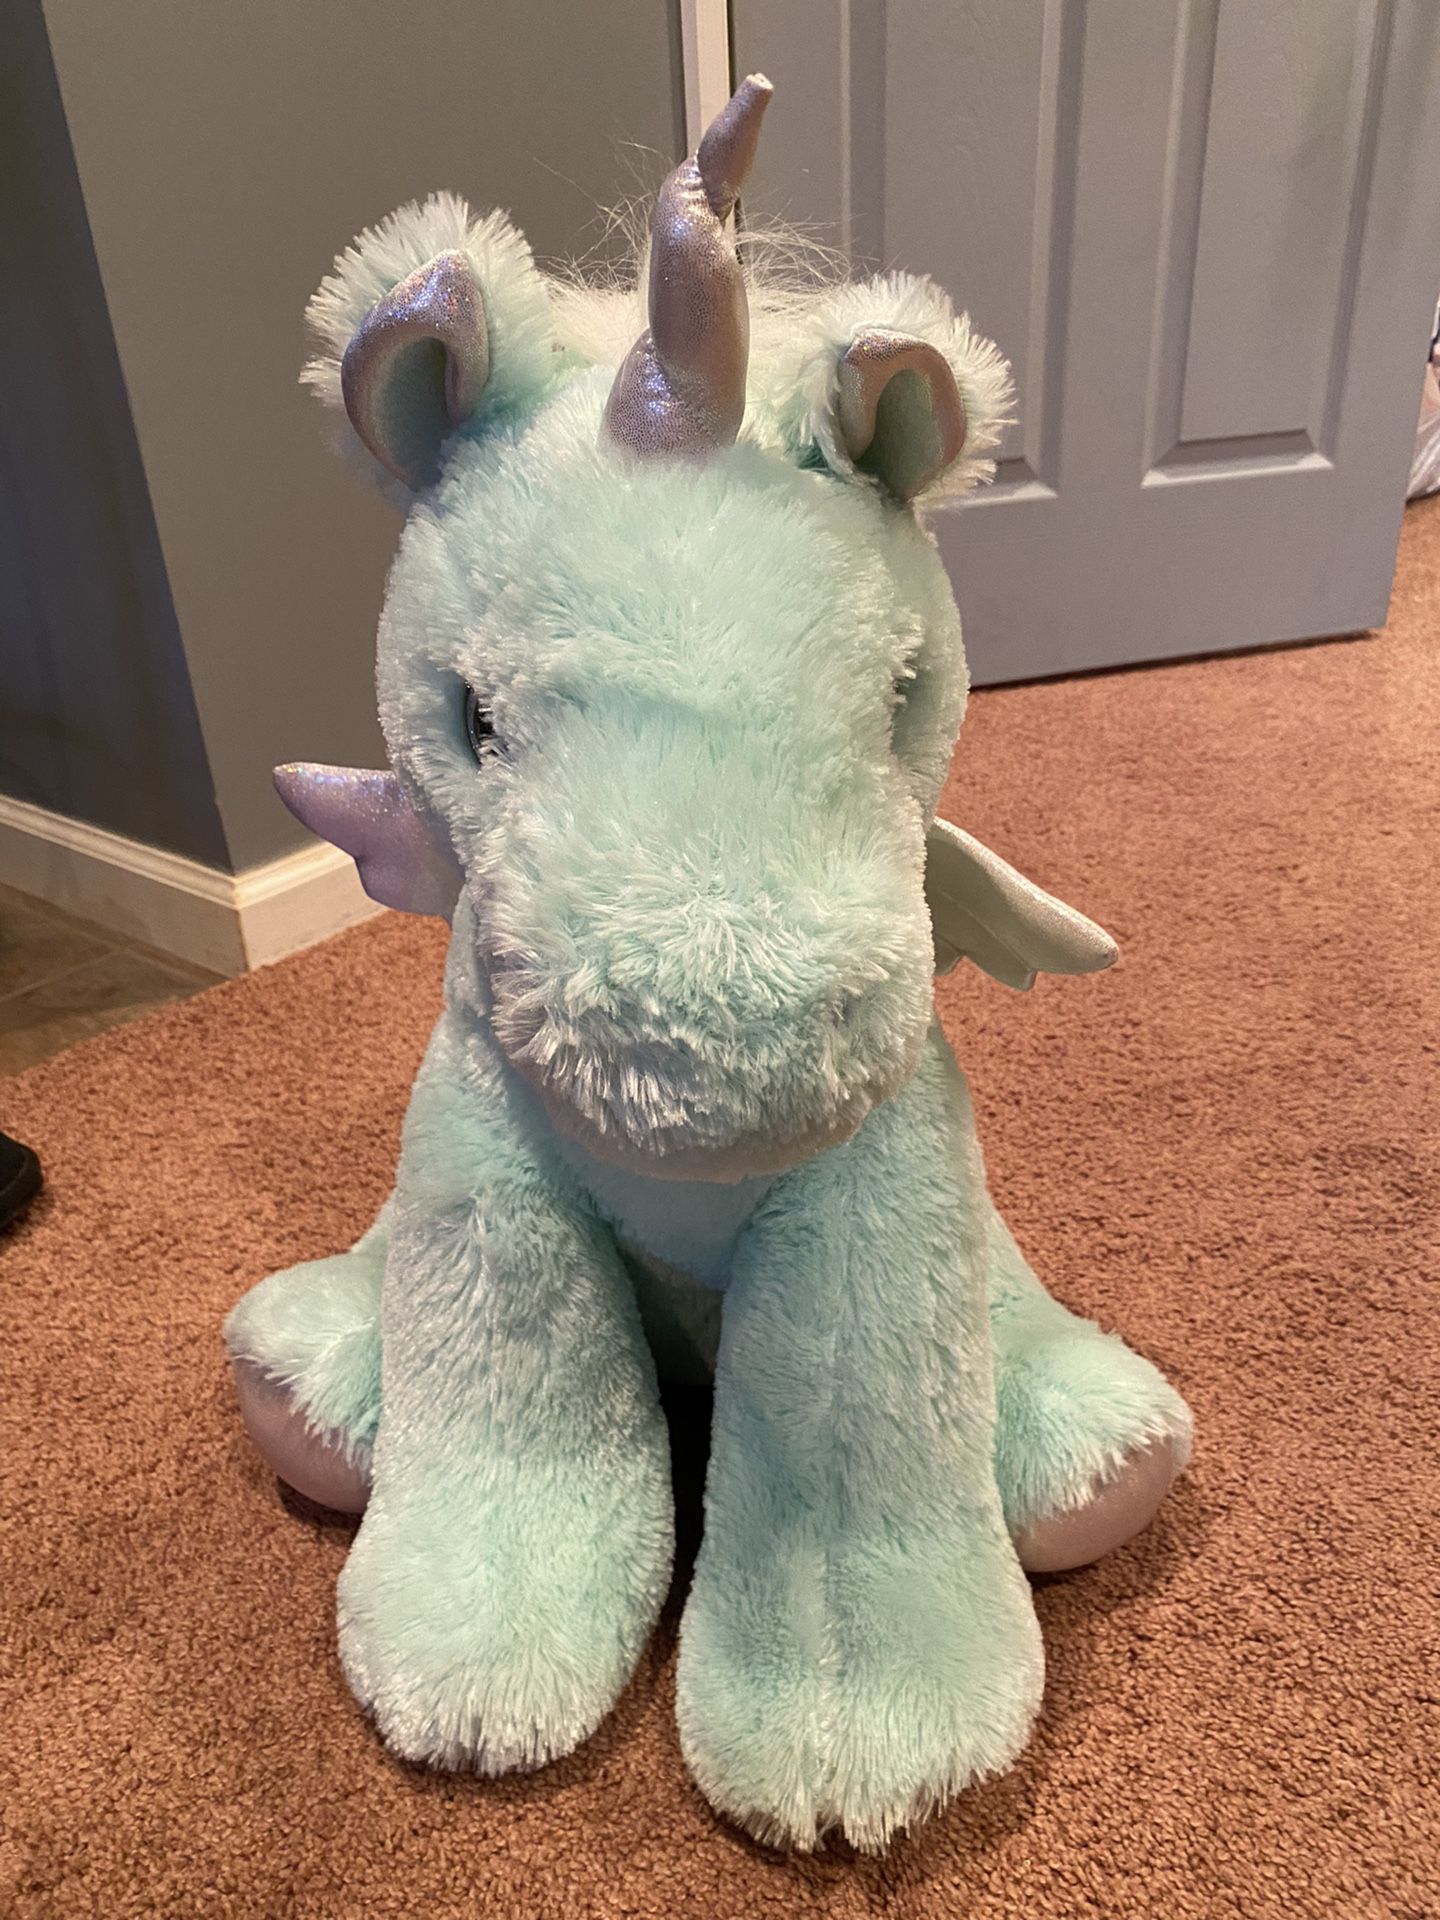 Teal unicorn from justice